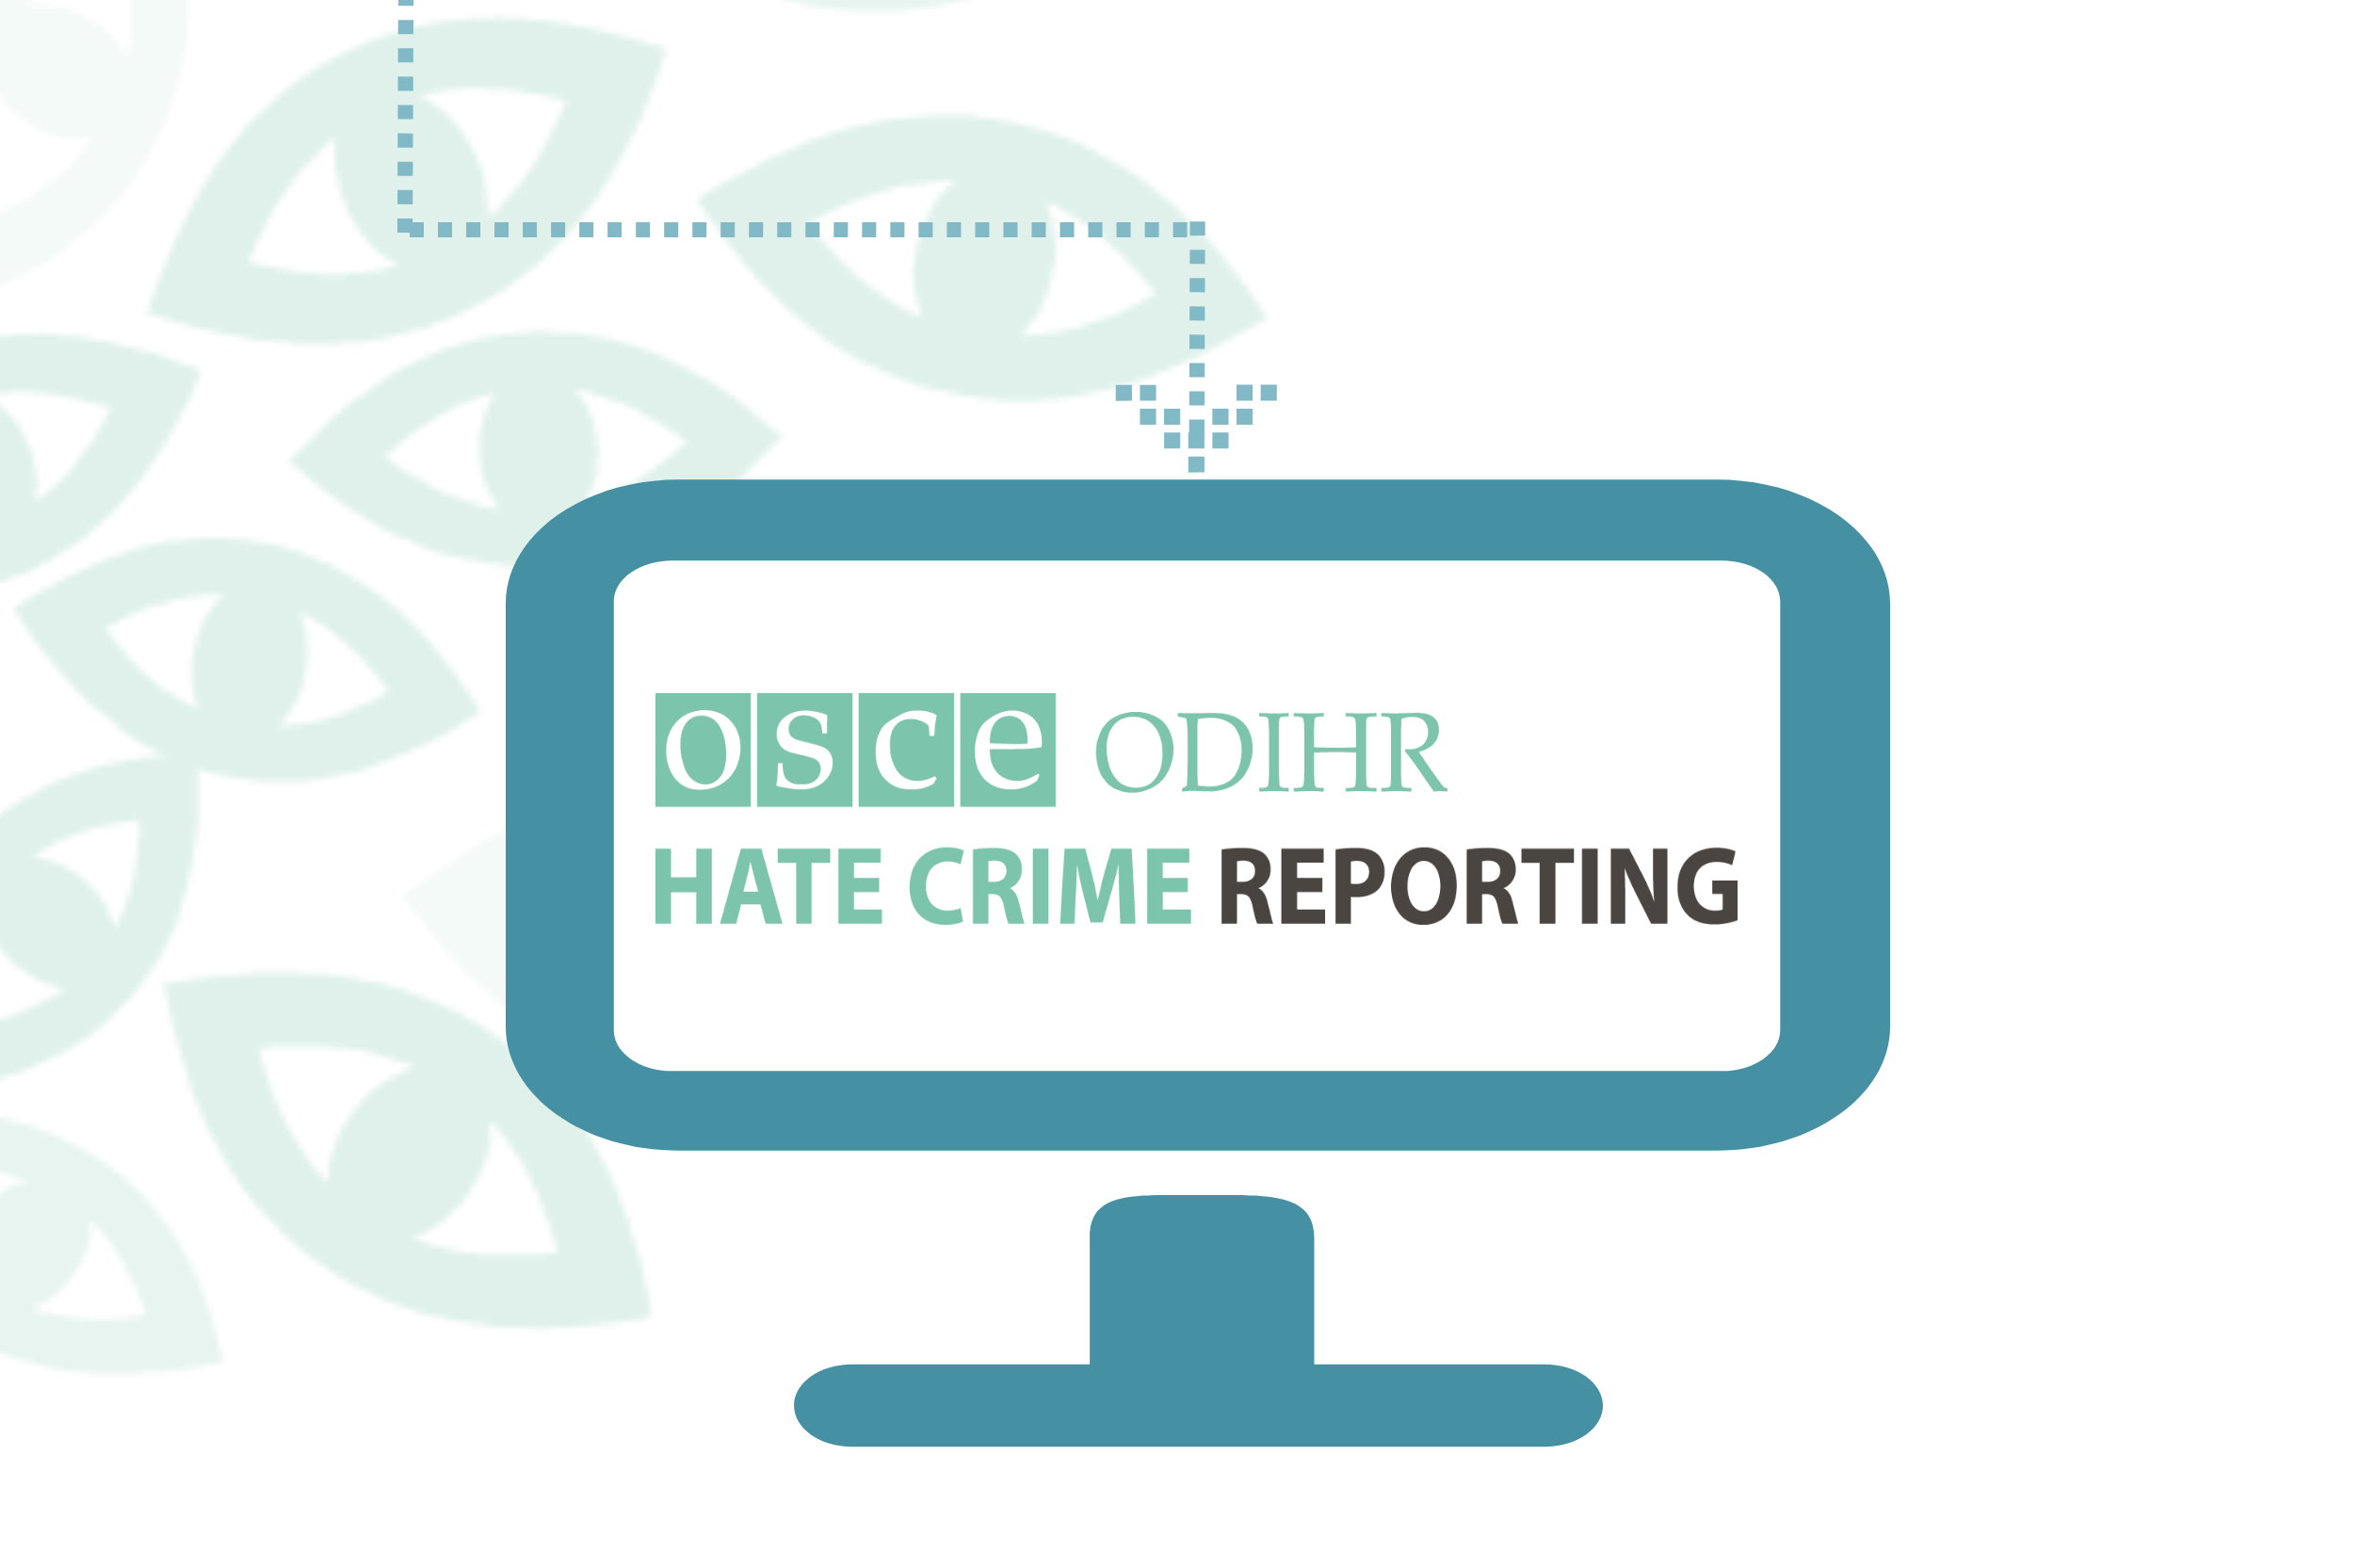 10 Cases of Hate Crime in Lithuania in 2019 submitted to ODIHR